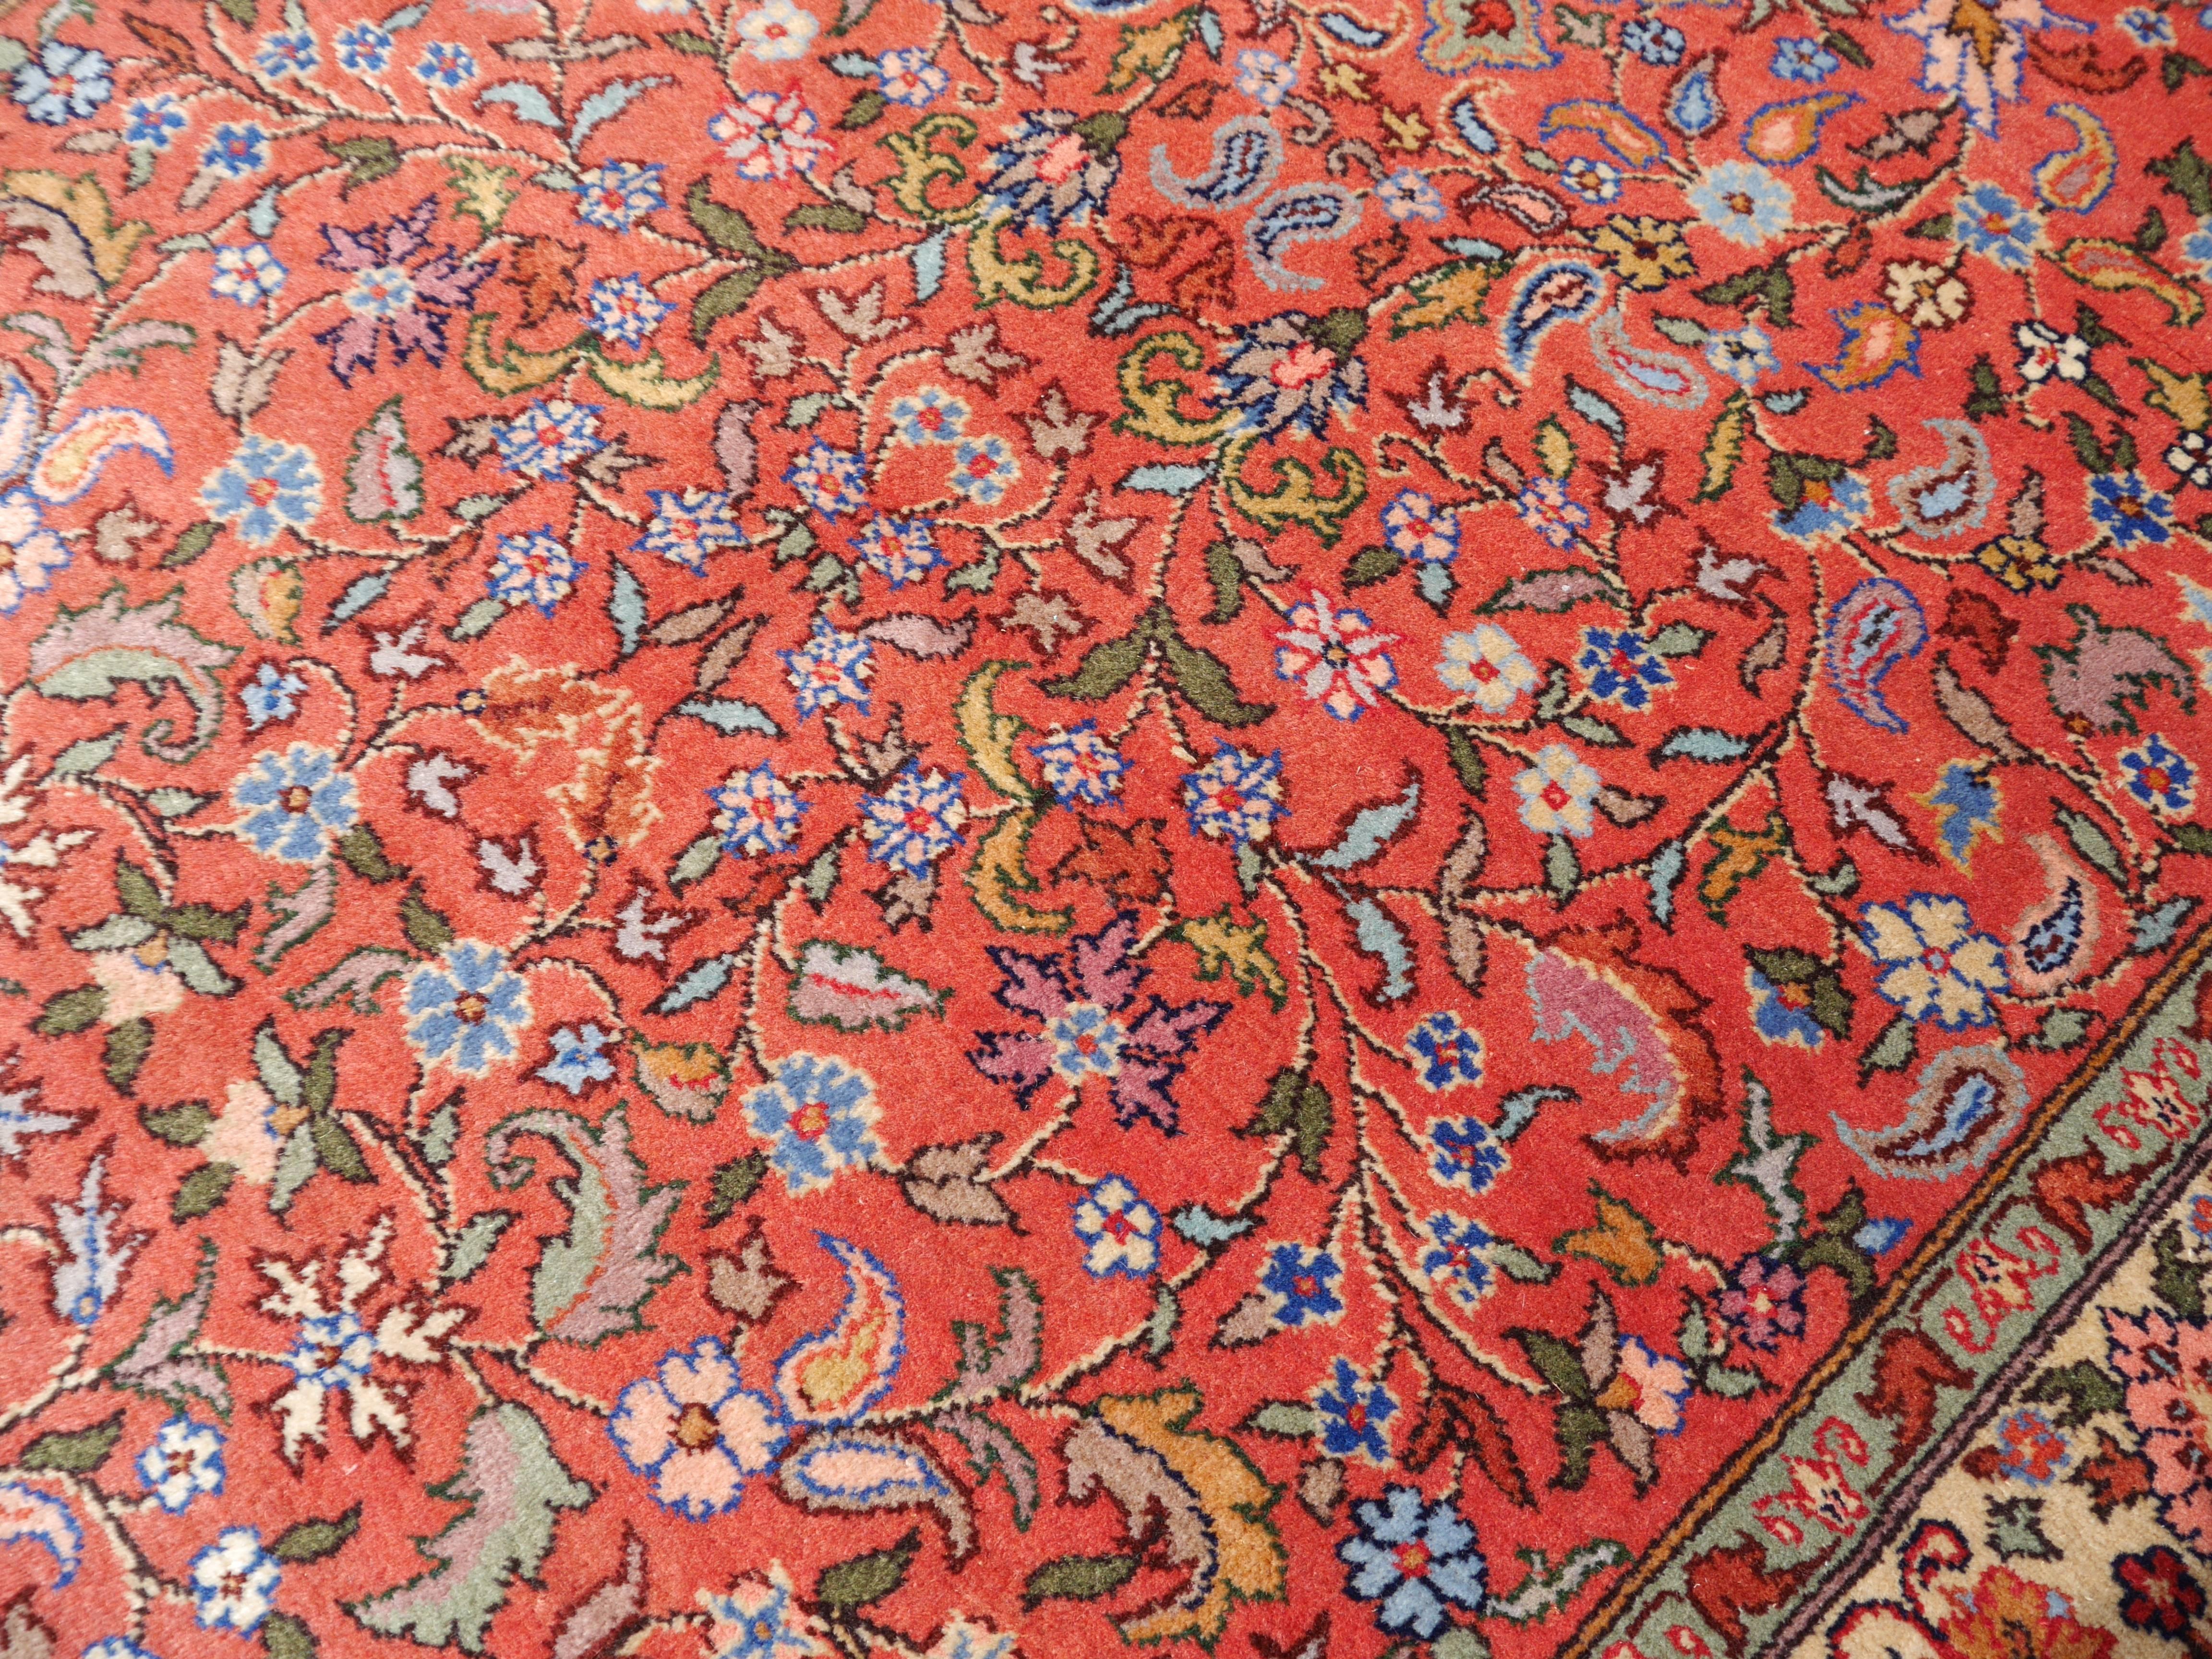 Tabriz Design Rug 18 x 5 ft large runner Persian traditional style 550 x 153 cm In Good Condition For Sale In Lohr, Bavaria, DE